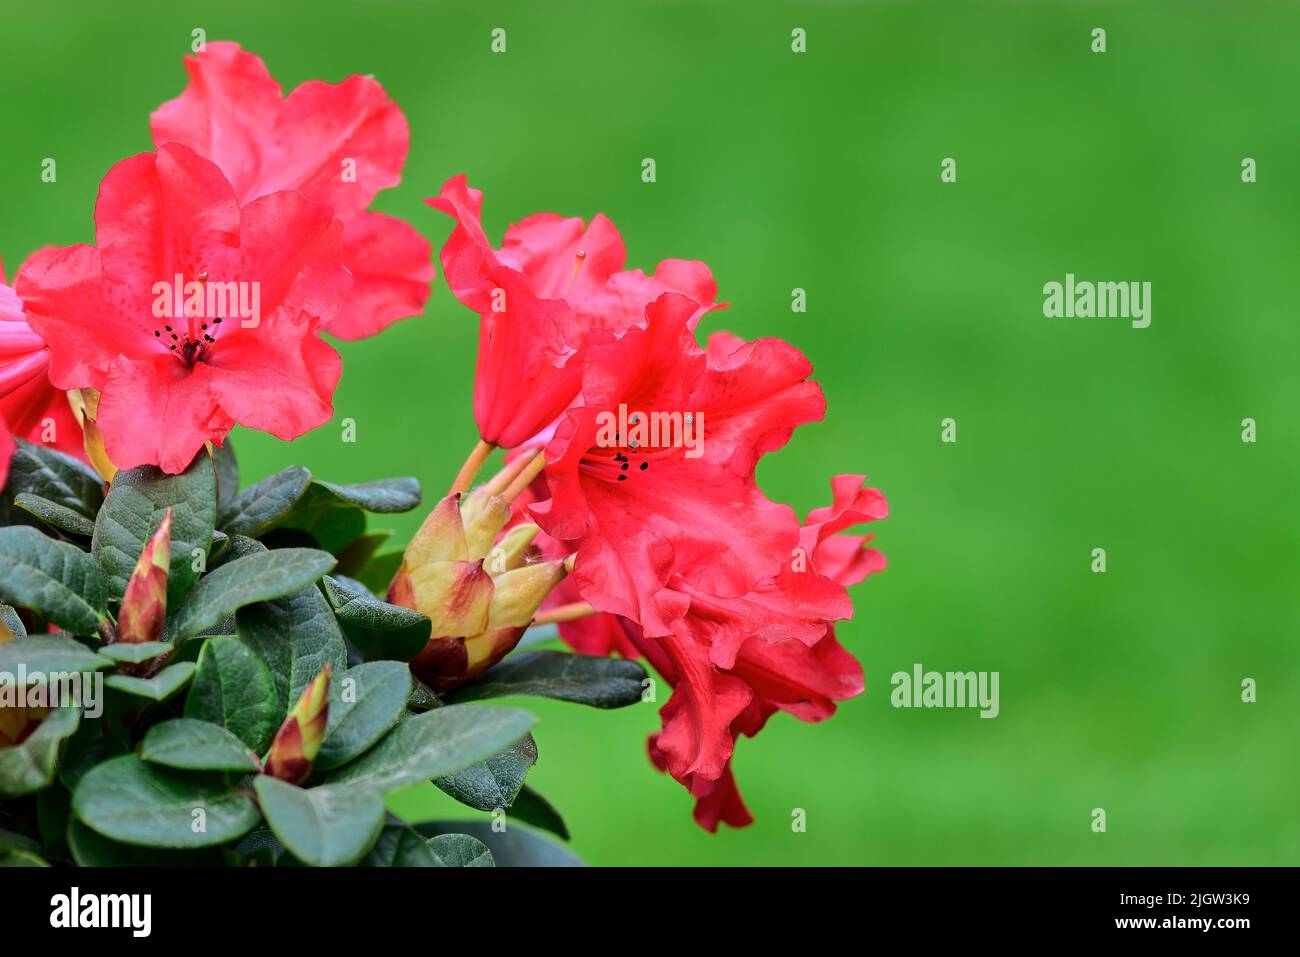 Red jack rhododendron flowers with leaves and buds, close up. Beautiful petals. Blurred natural green background, copy space. Trencin, Slovakia. Stock Photo